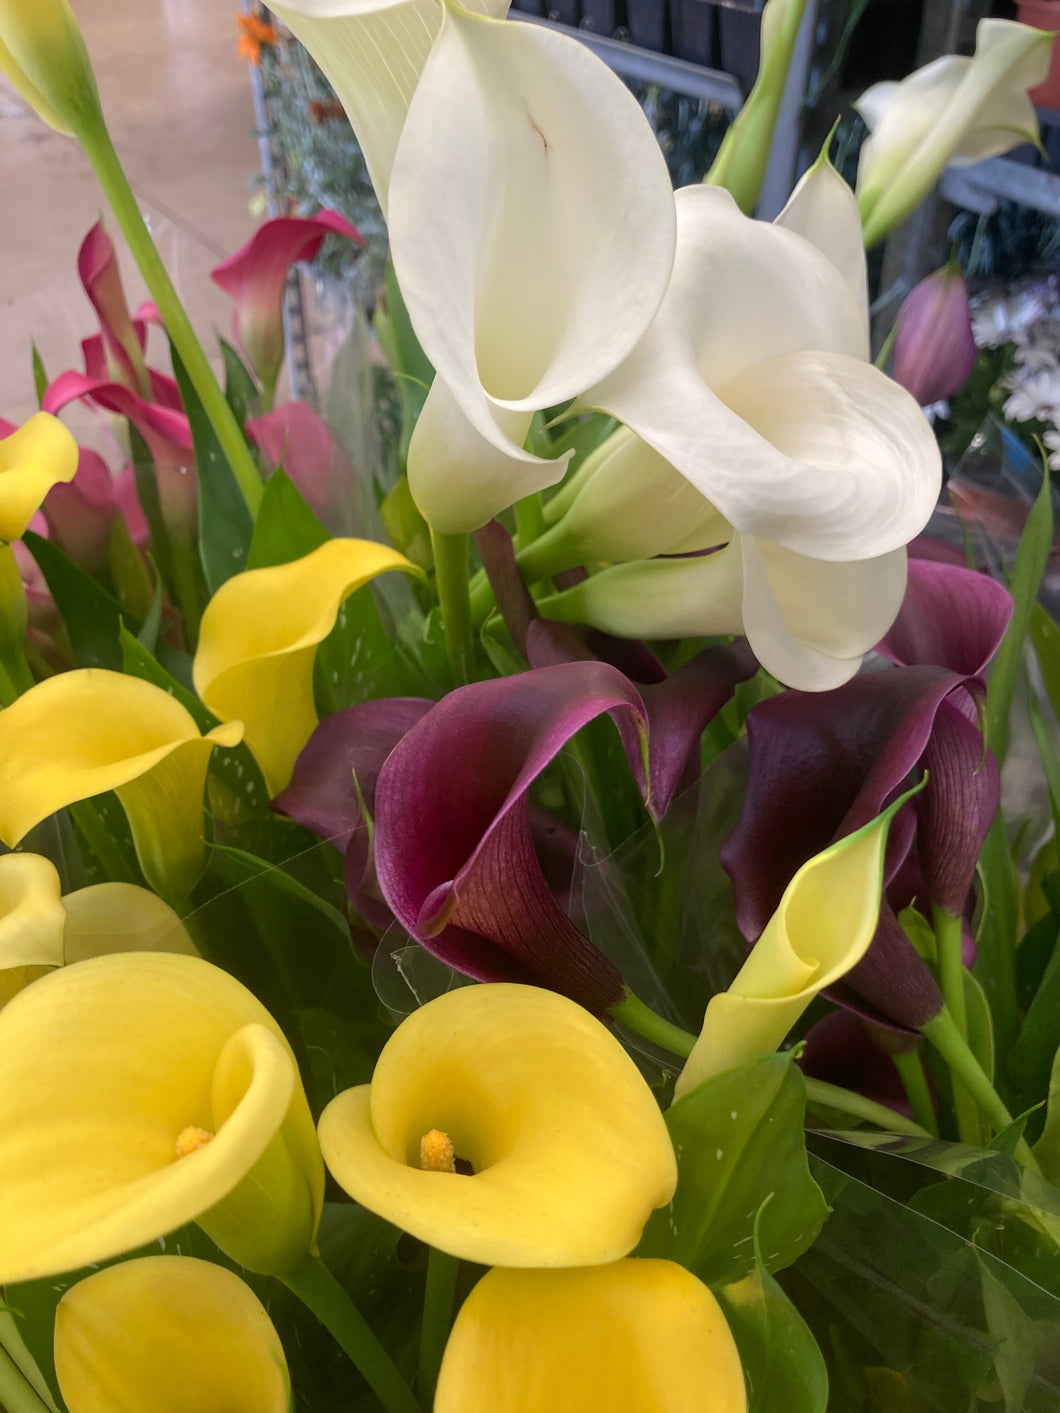 1 tuber of Calla Lily/Zantedeschia (mixed varieties) Includes Postage